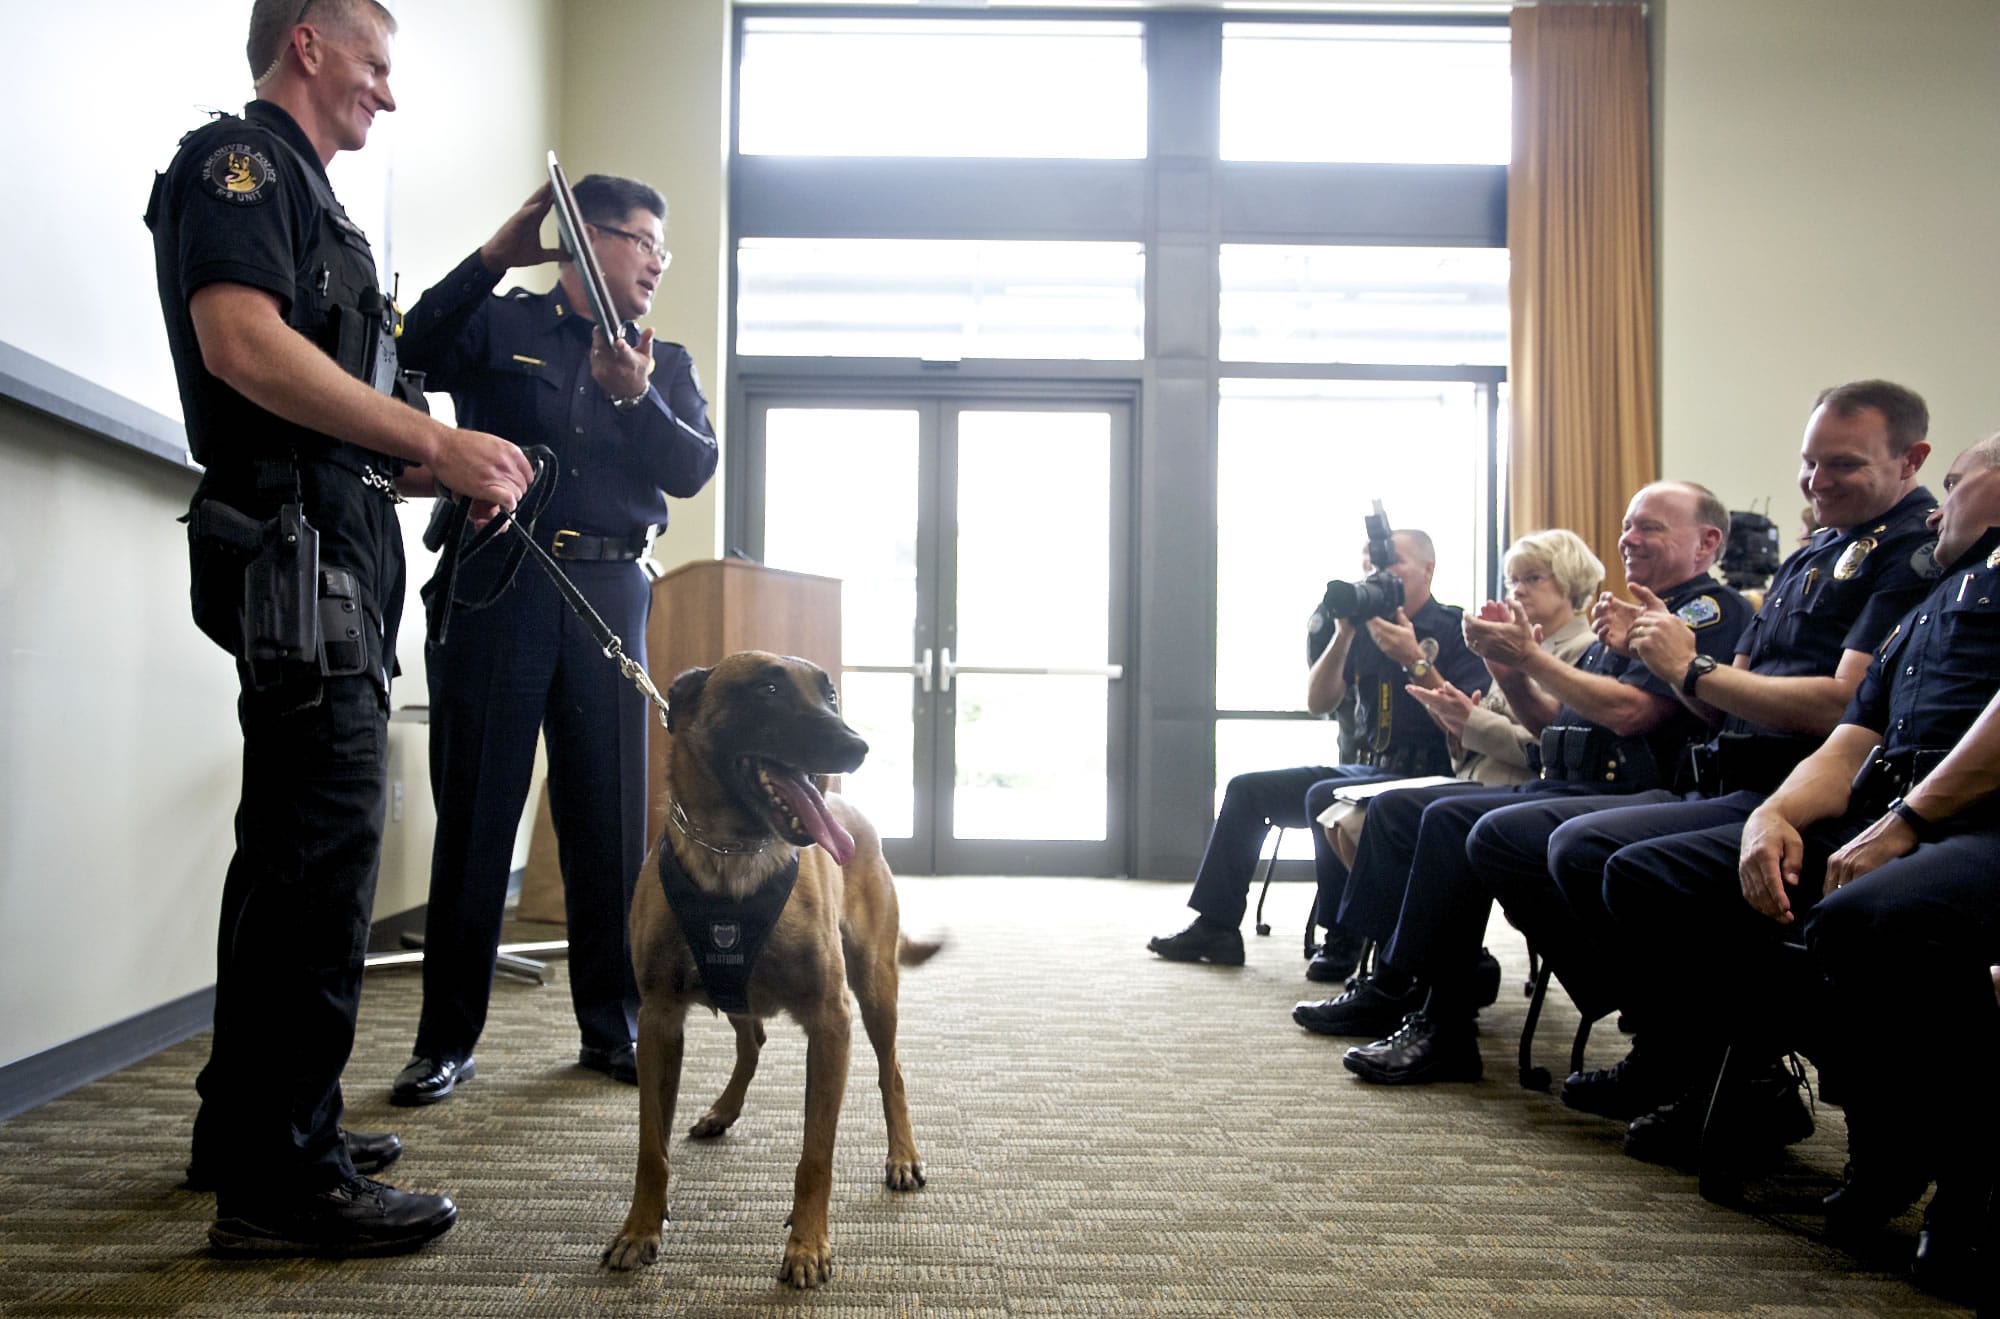 The Vancouver Police Chief Cliff Cook holds up a plaque as he recognizes officer Jack Anderson, left, and his K-9 partner, Ike, during a ceremony June 25.